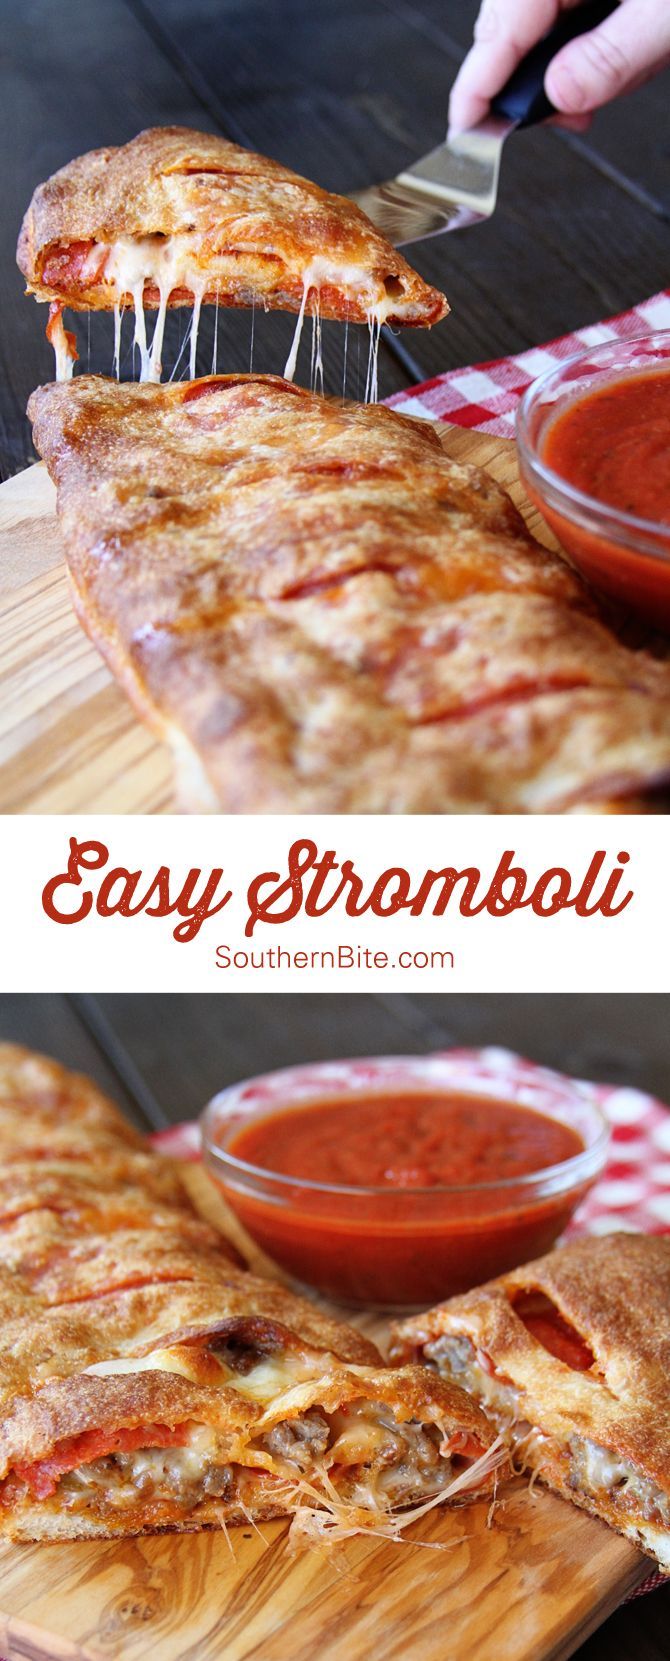 This looks yummmy and easy peasy to make. :-)  This EASY stromboli only calls for 5 ingredients and can be done in about 35